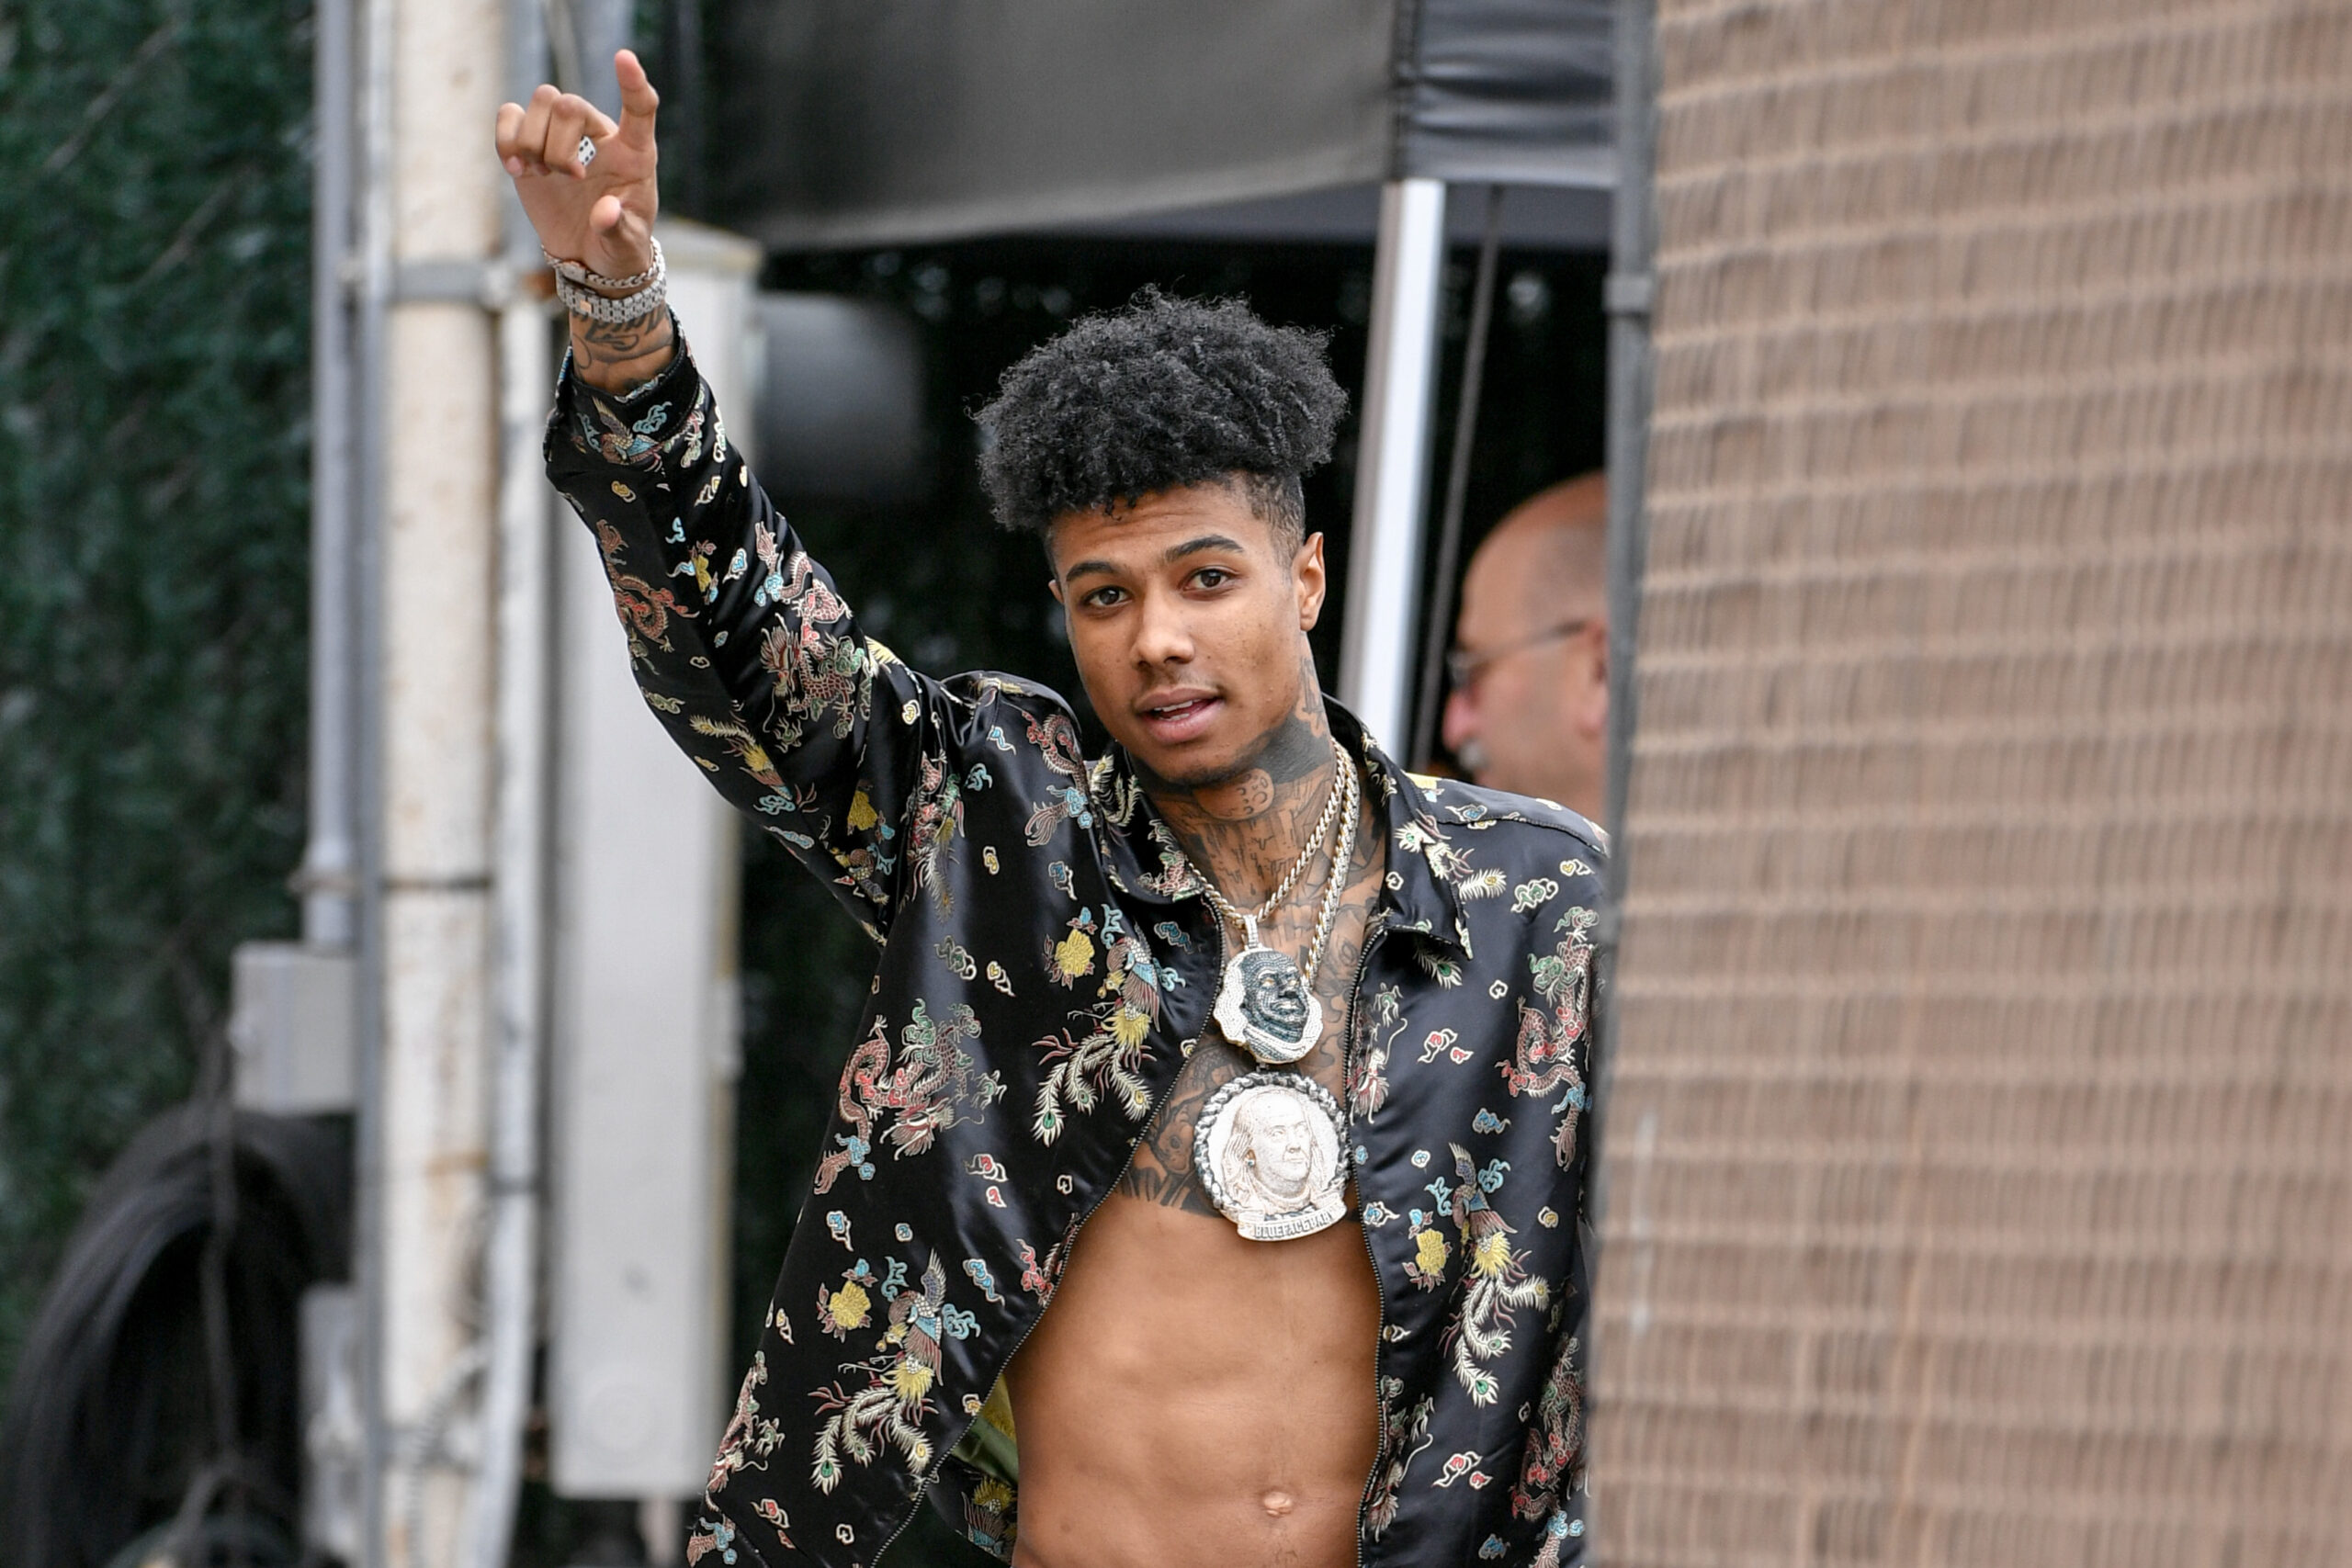 Blueface Celebrates Staying Loyal To Jaidyn Alexis For “About 2 Weeks,” Plans To Make It 3